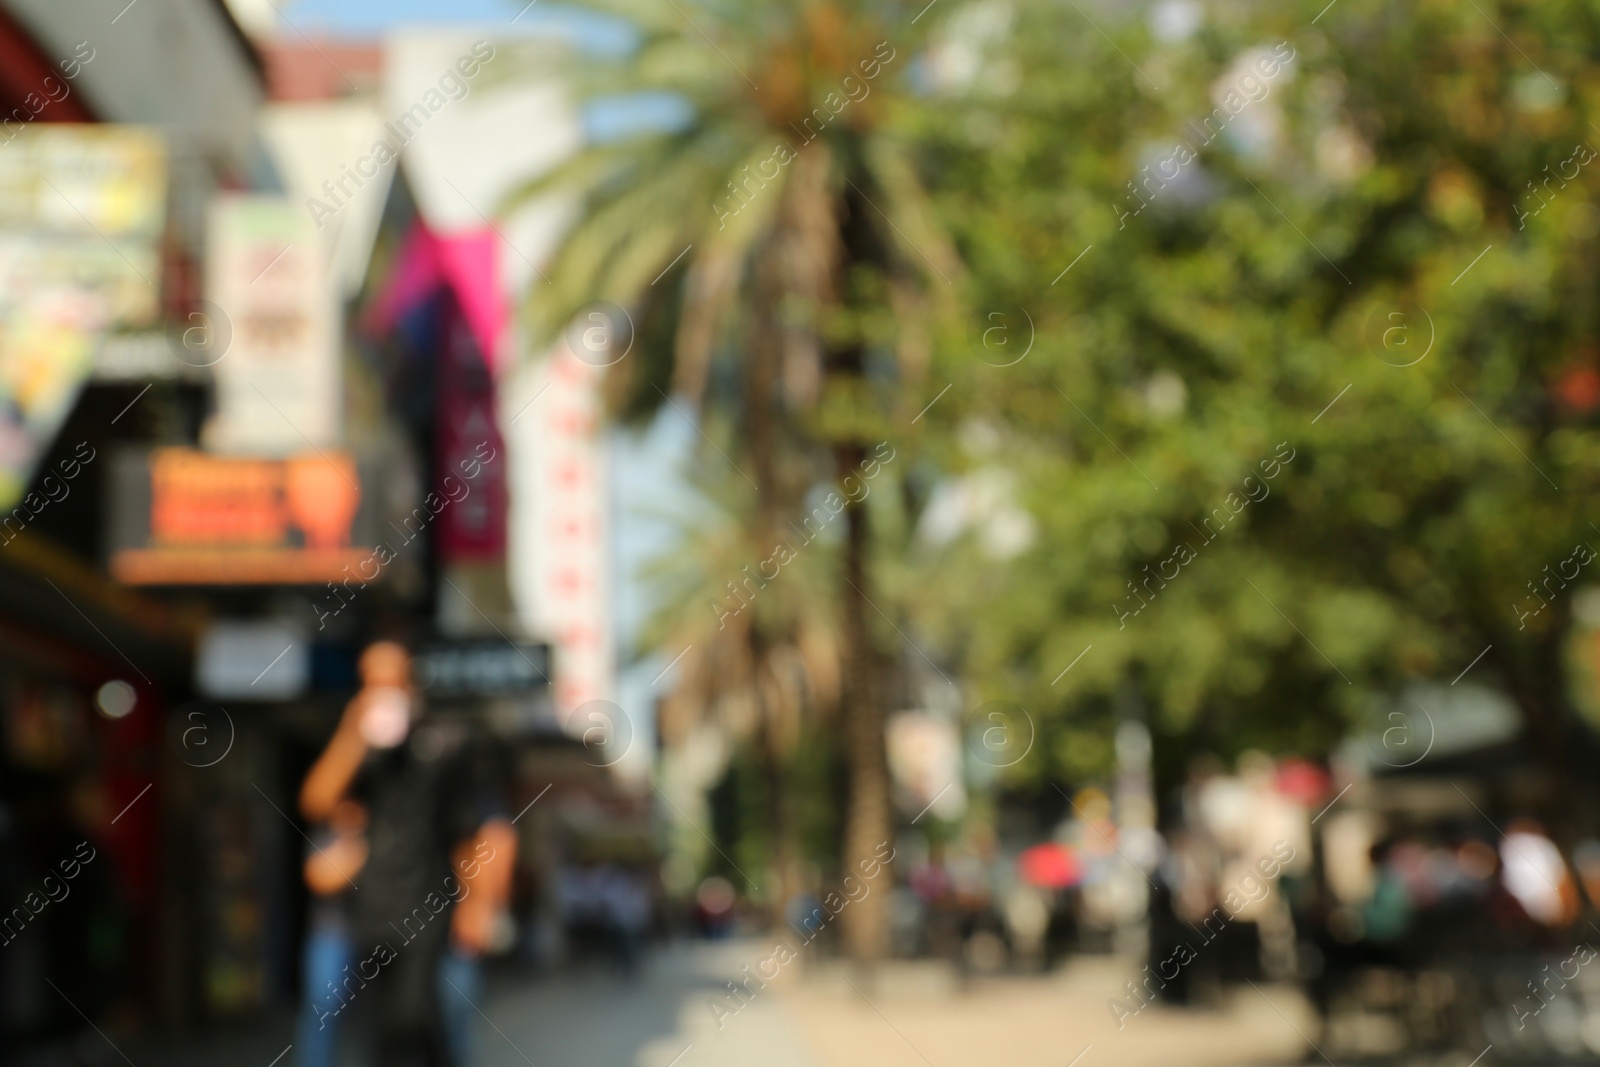 Photo of Blurred view of city street with palm trees